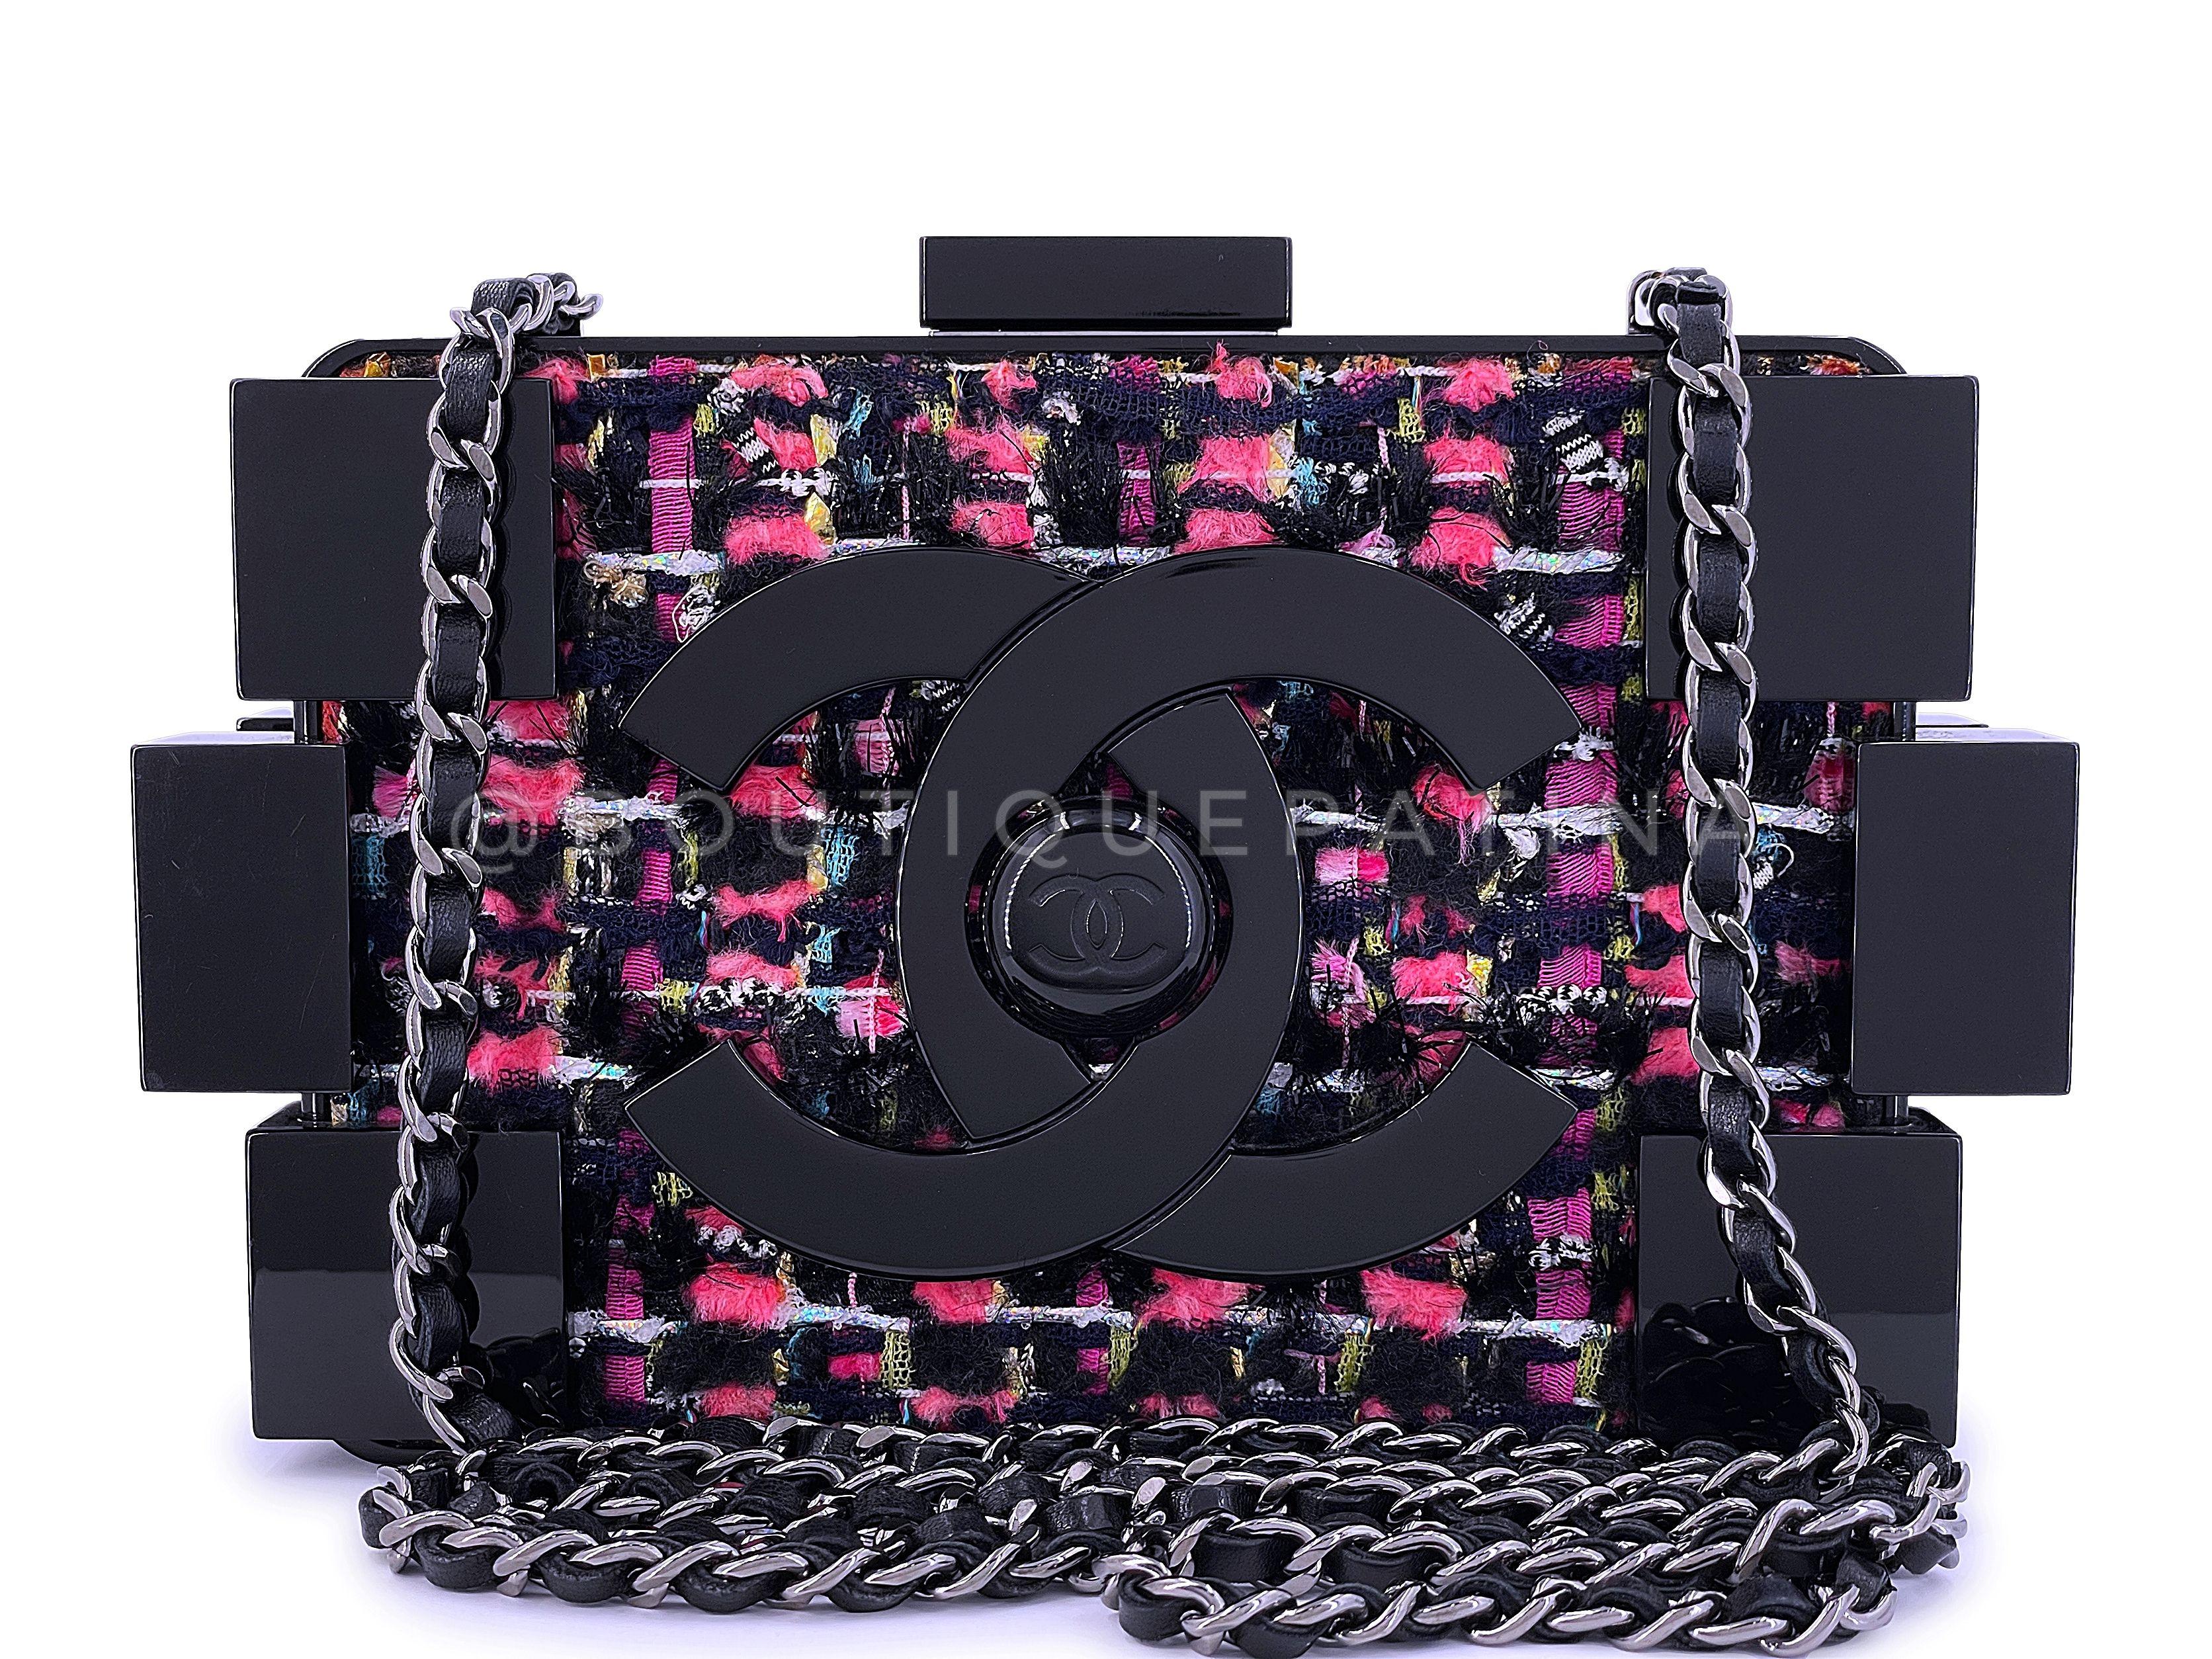 Store item: 67566
Chanel 2013 Fuchsia Black Tweed Lego Brick Minaudière Clutch Bag RHW Plexiglass

From Lagerfeld's 2013 Fall/Winter runway, a collectible rare item with multicolored pink tweed on both sides and black plexiglass. Leather lined